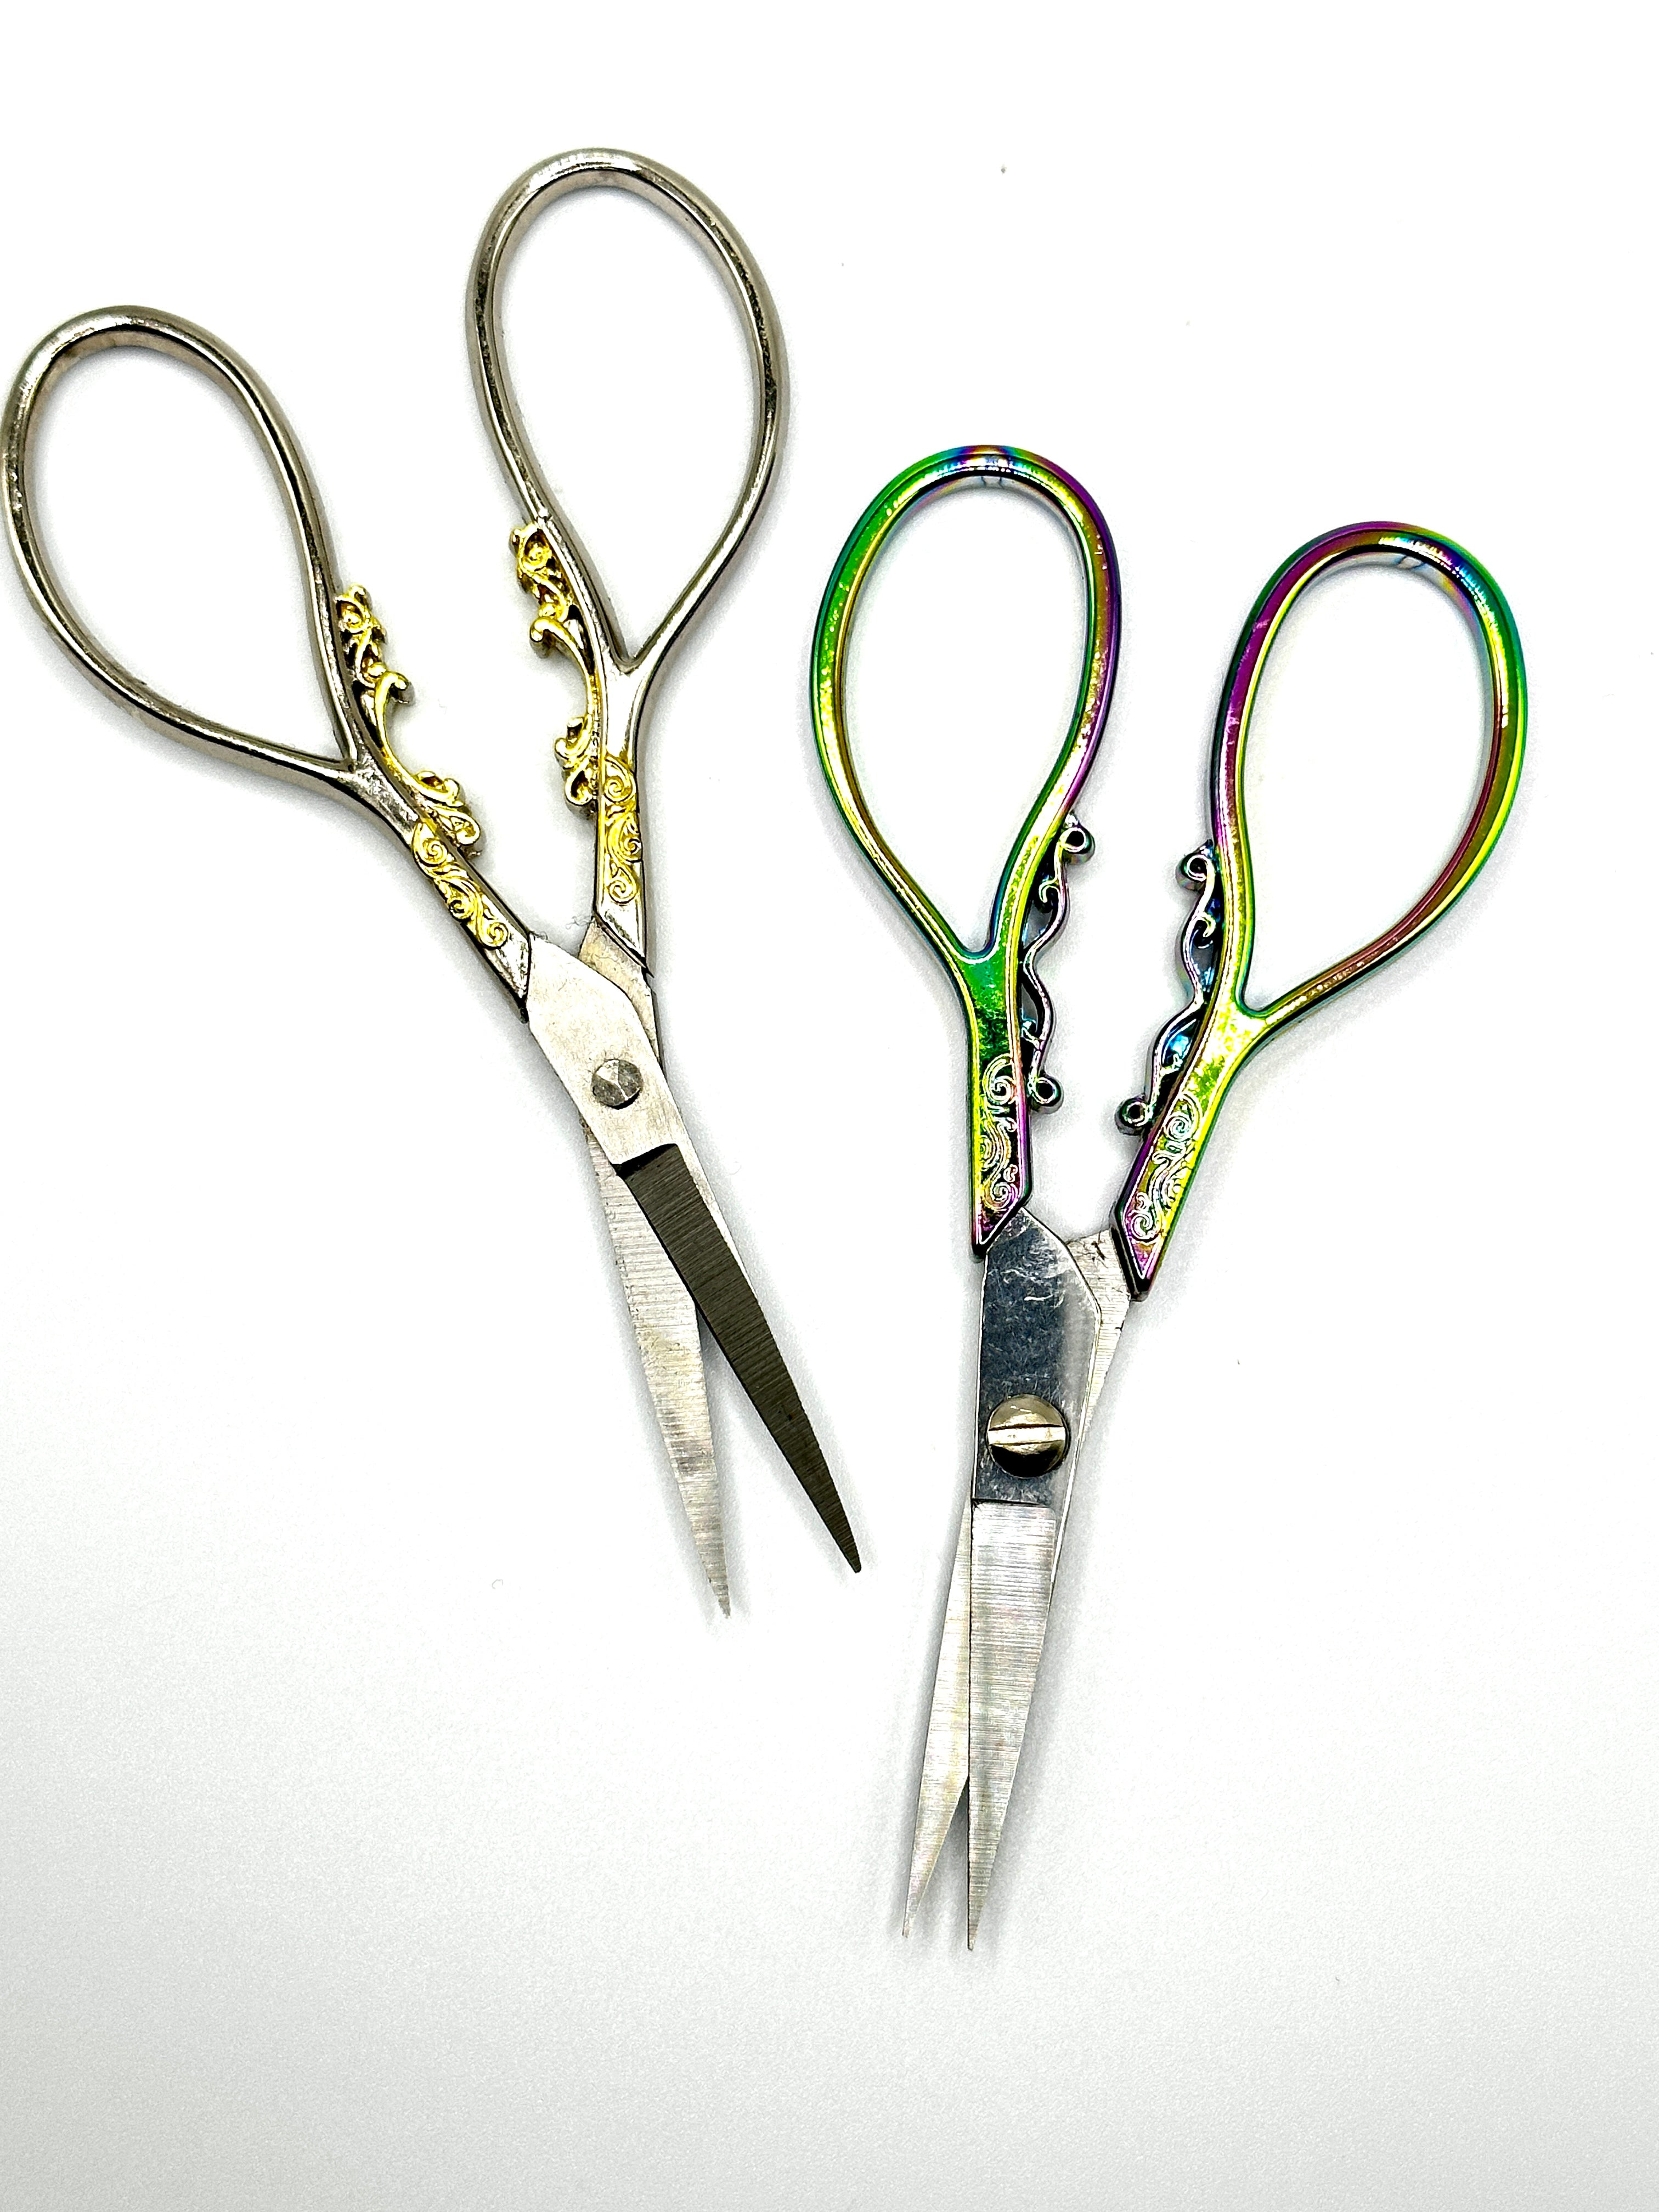 Embroidery Scissors with Large Loops